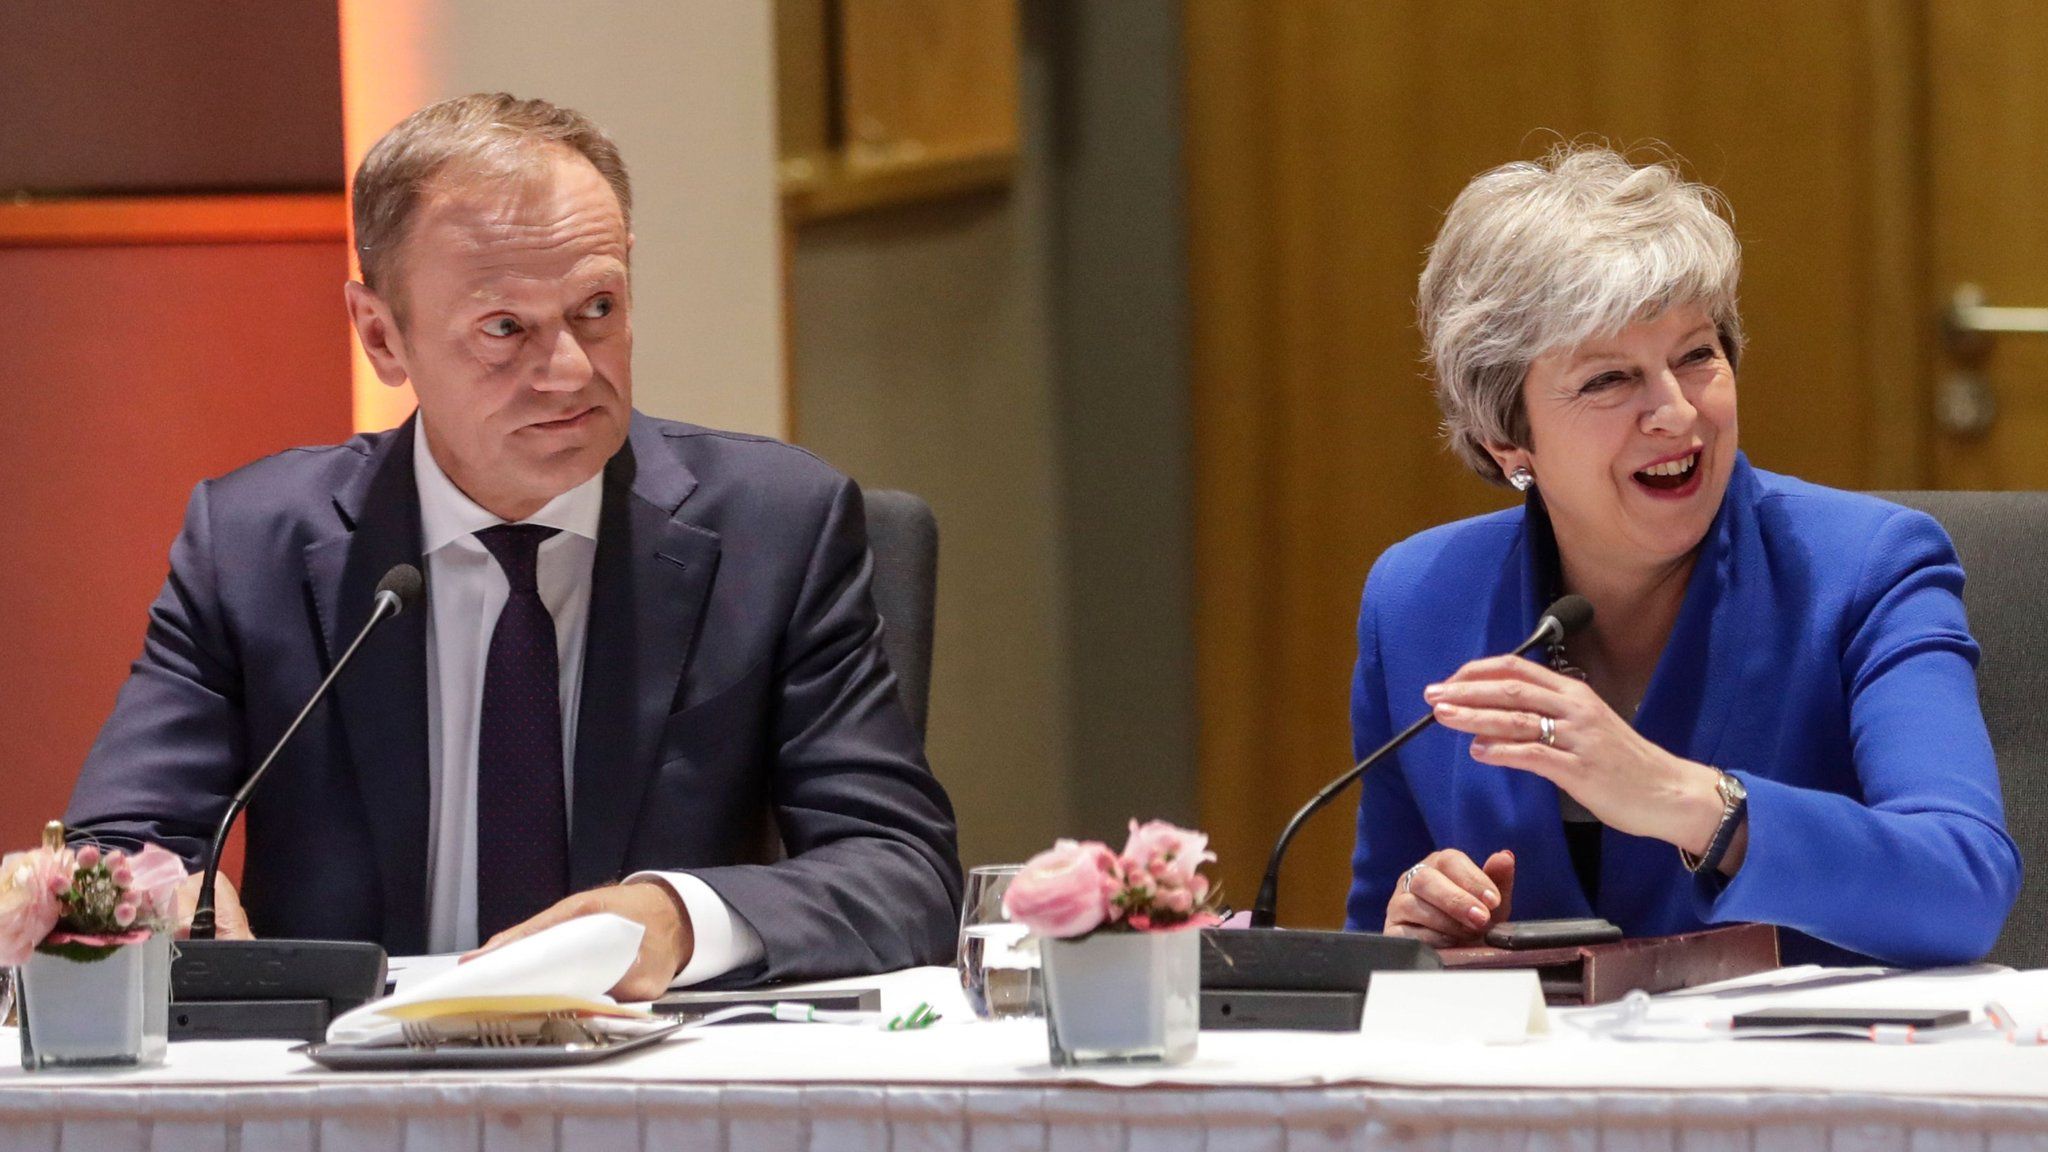 European Council President Donald Tusk (L) and Britain"s Prime Minister Theresa May look on during a European Council meeting on Brexit